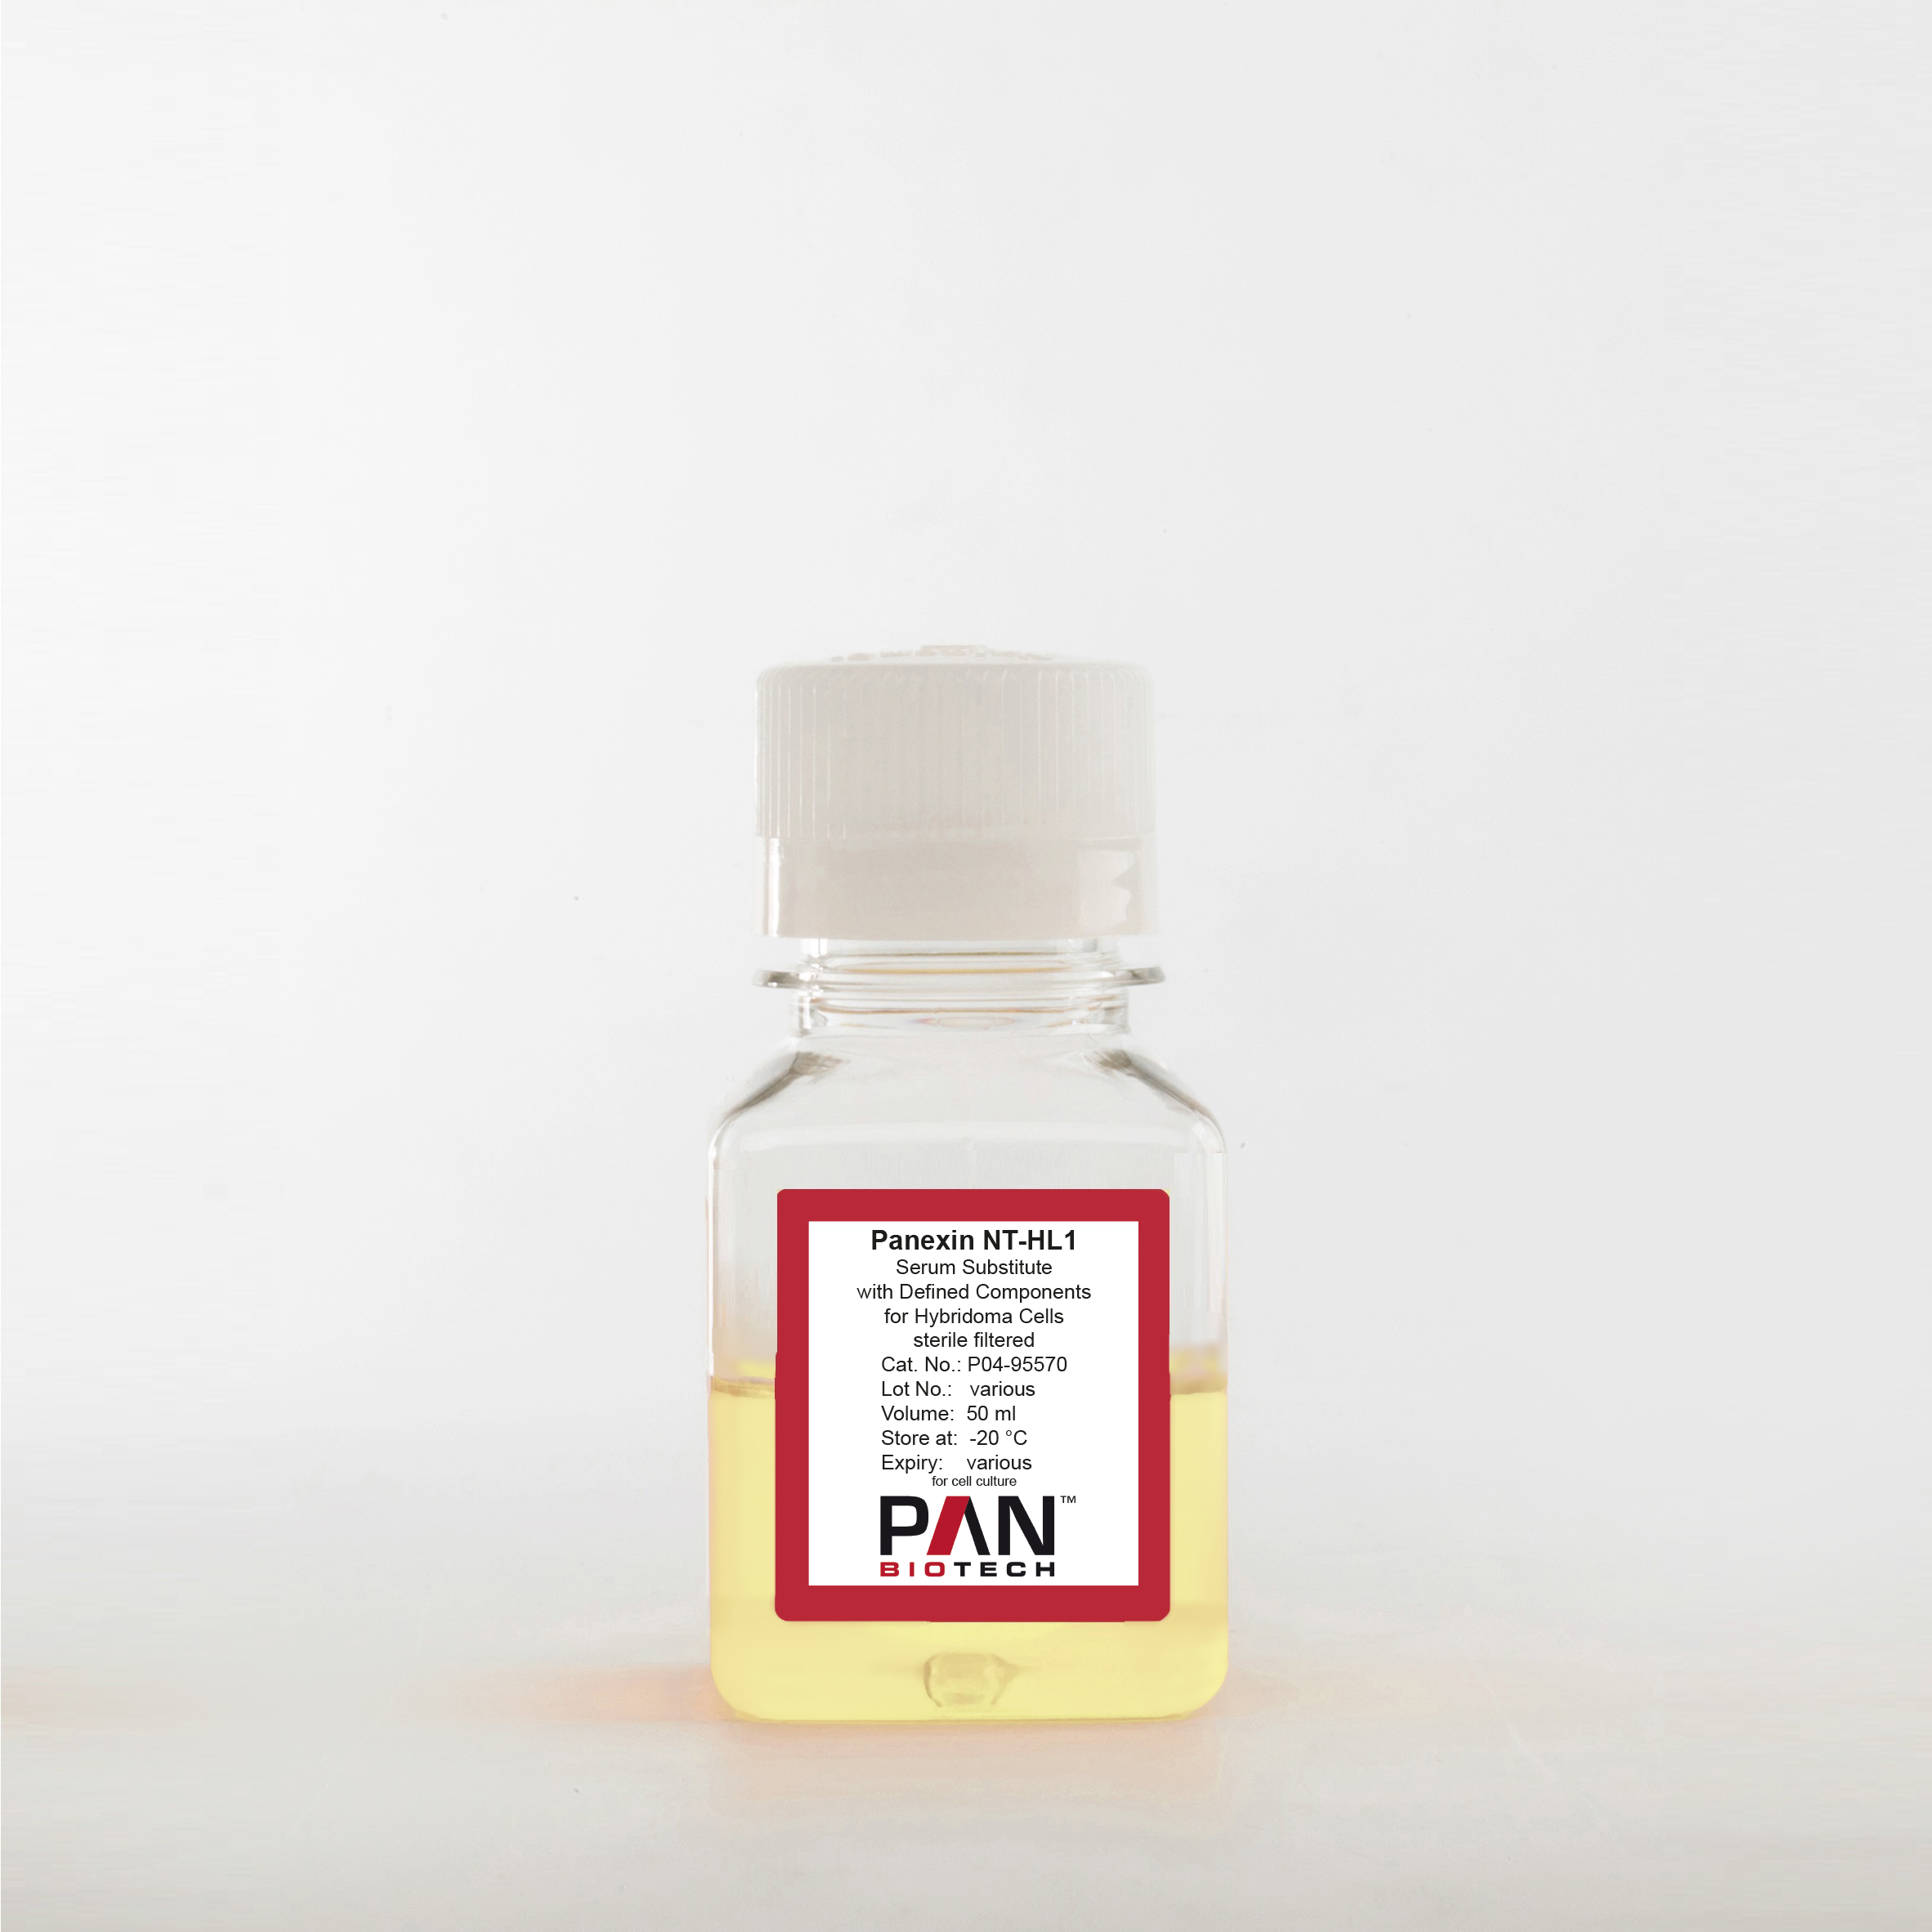 Panexin NT-HL1, Serum Substitute (100x) with Defined Components for Hybridoma Cells